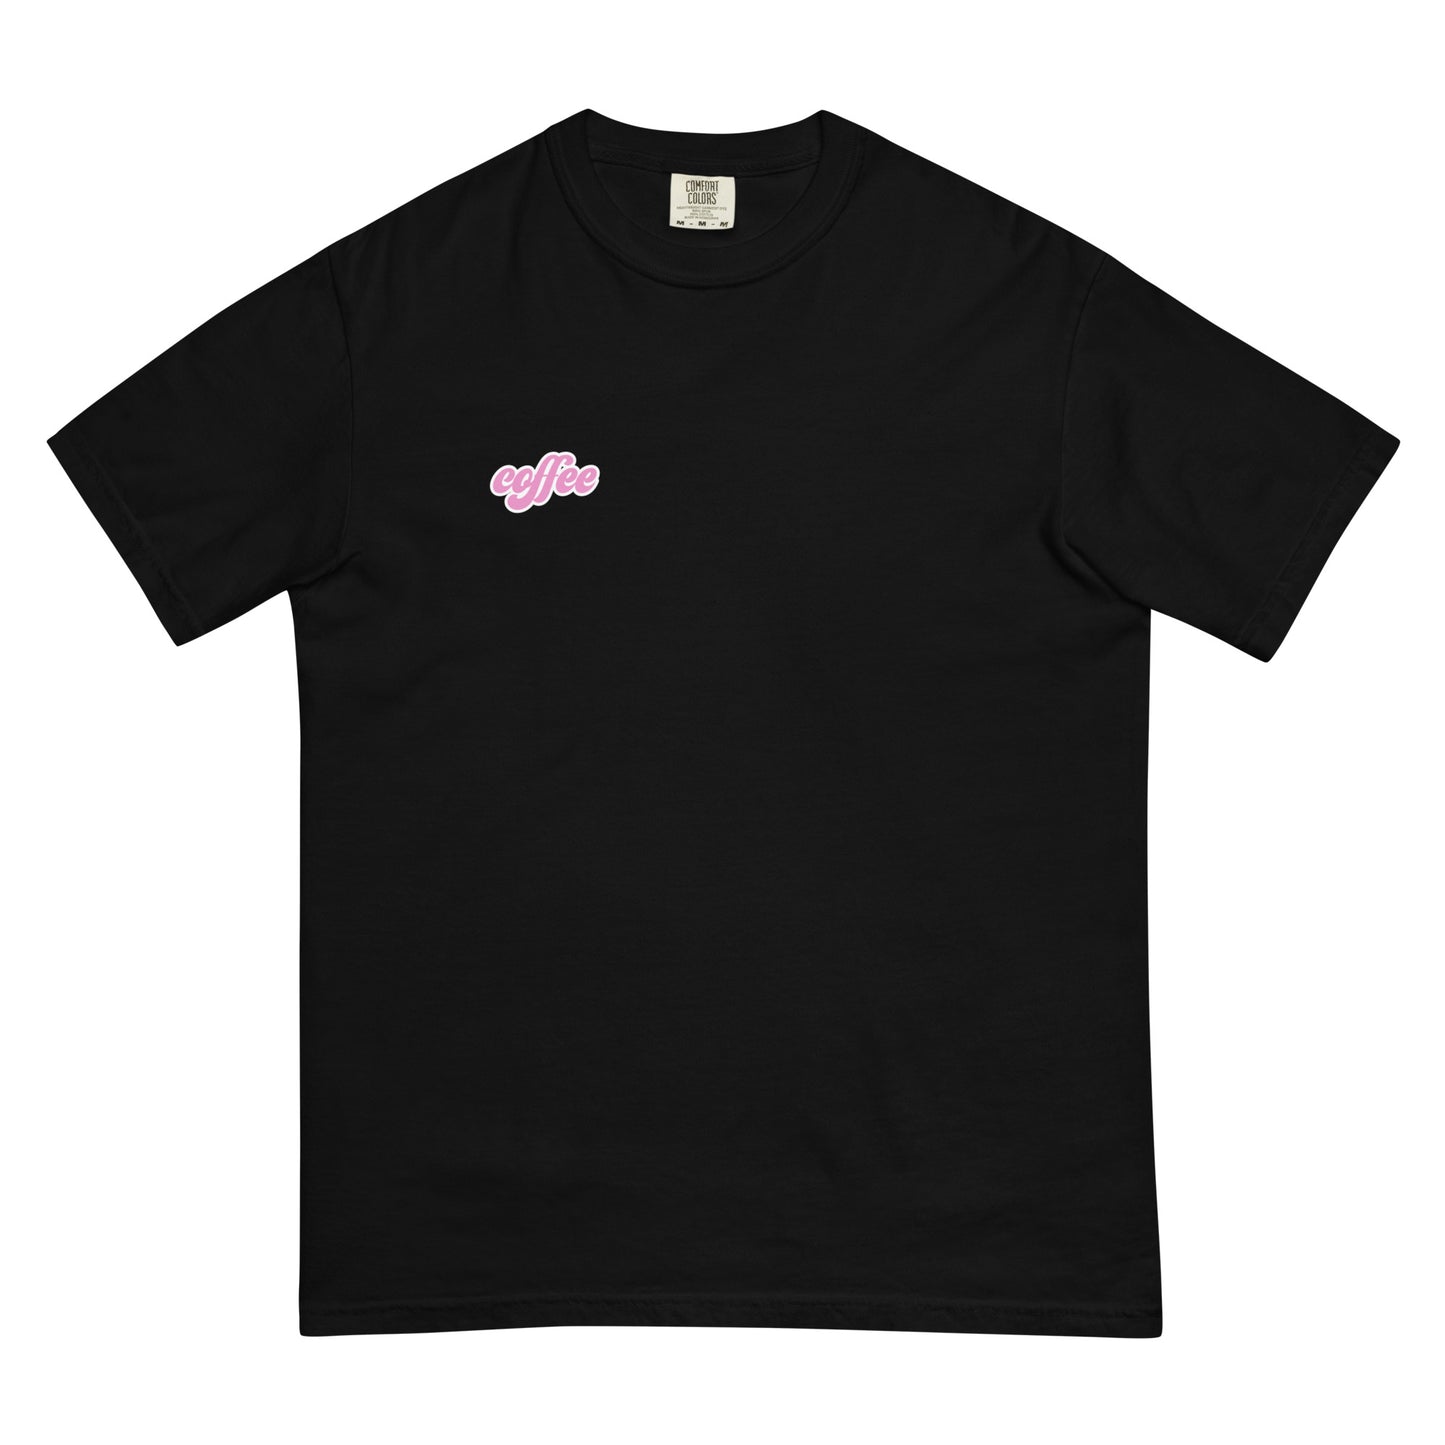 Smile coffe t-shirt in black